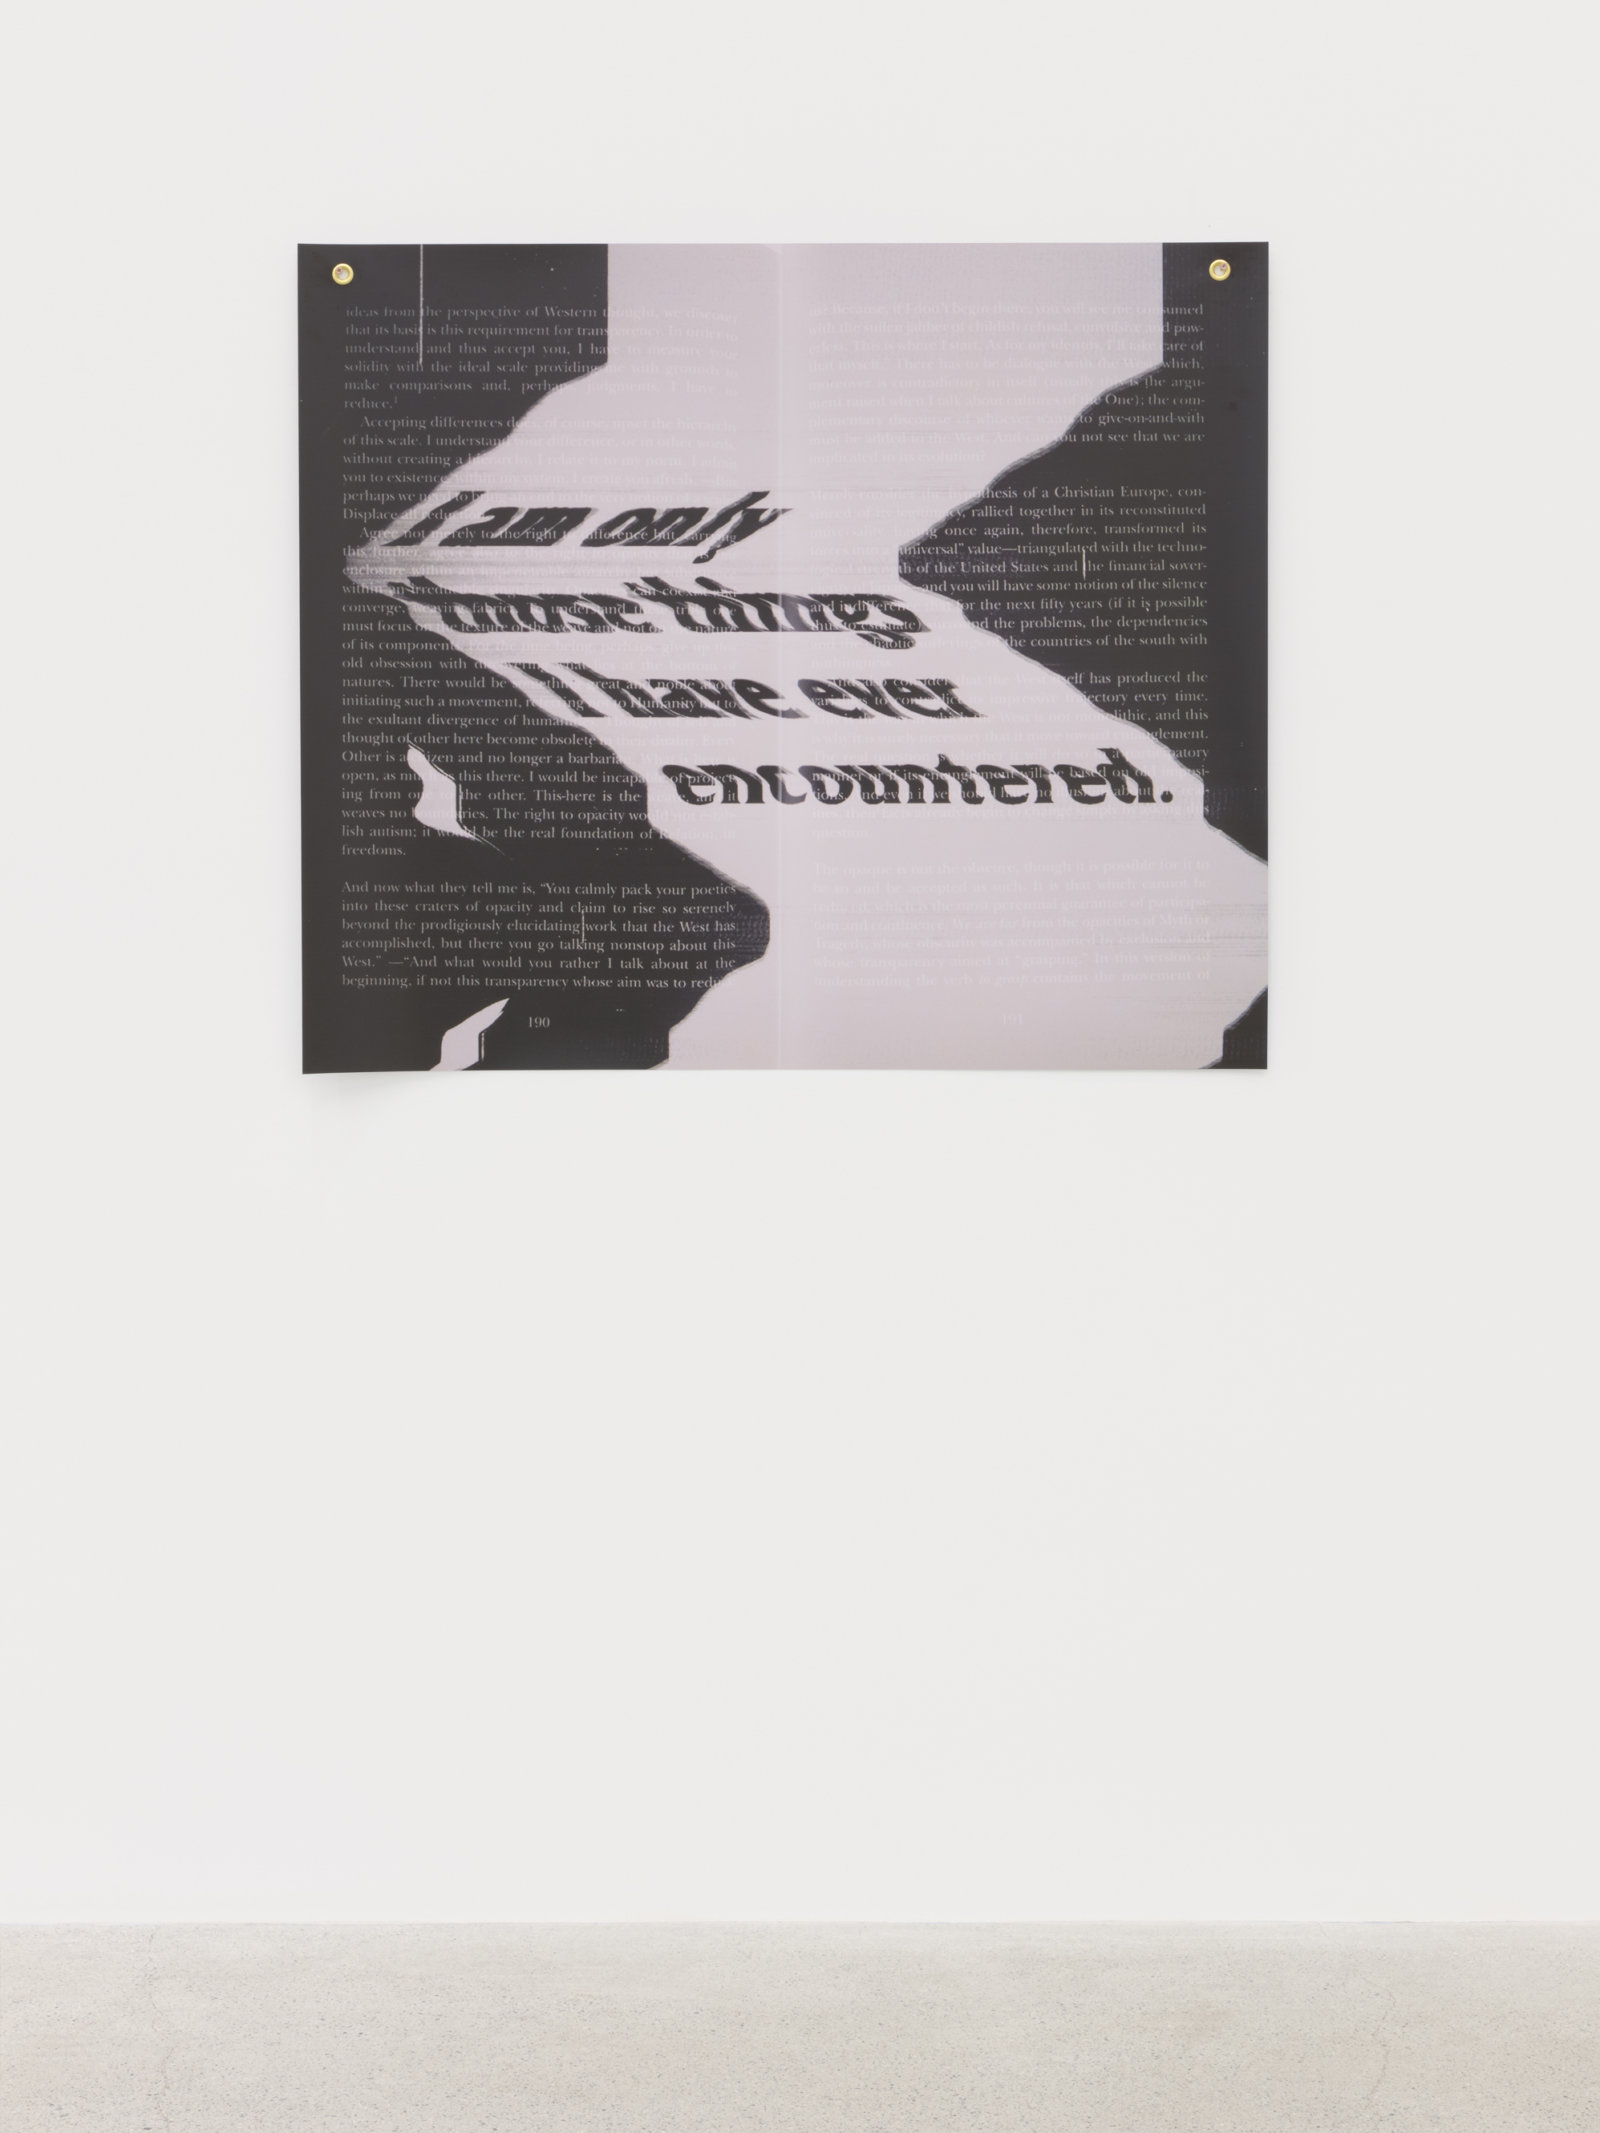 Raymond Boisjoly, After Some Imbalance, After Édouard Glissant (“…requirement for transparency.”), 2021, solvent-based inkjet print on vinyl, grommets, 36 x 42 in. (91 x 107 cm)